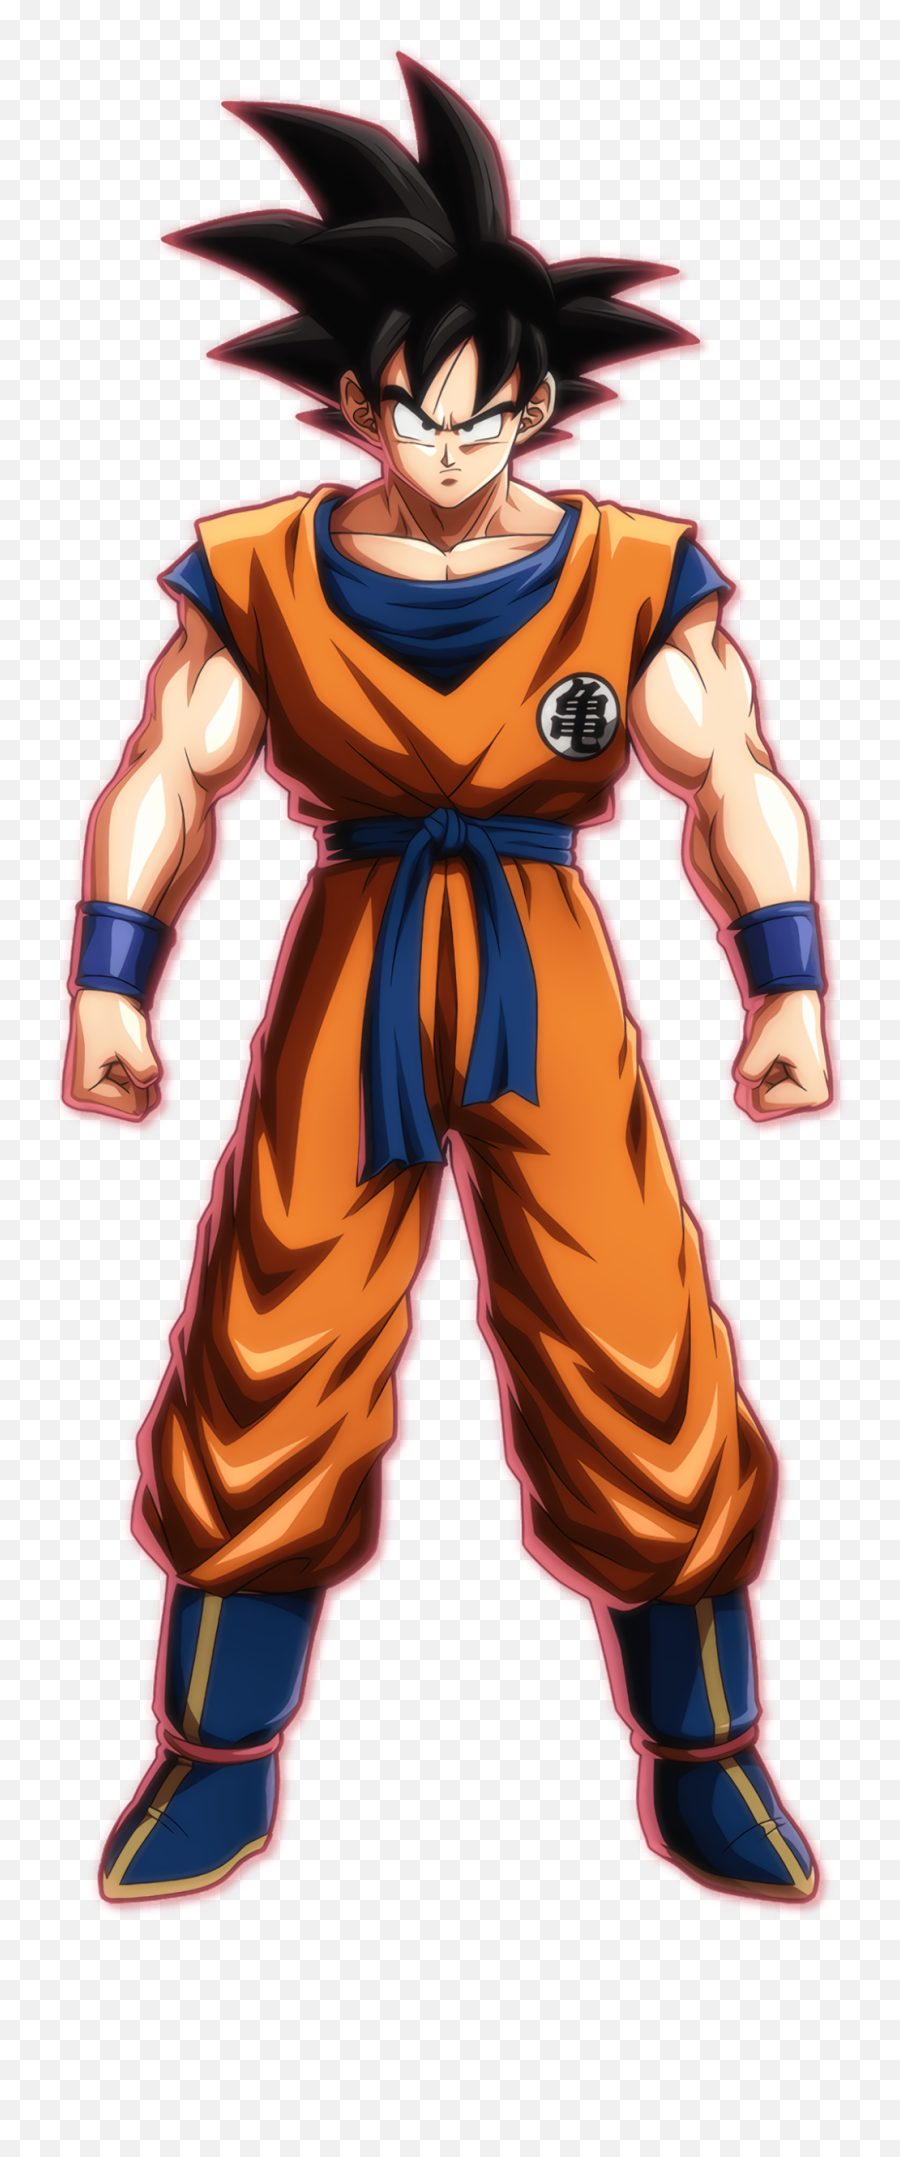 Normal But Powerful Official Renders And Icons For Base - Dragon Ball Fighterz Goku Png,Vegeta Transparent Background